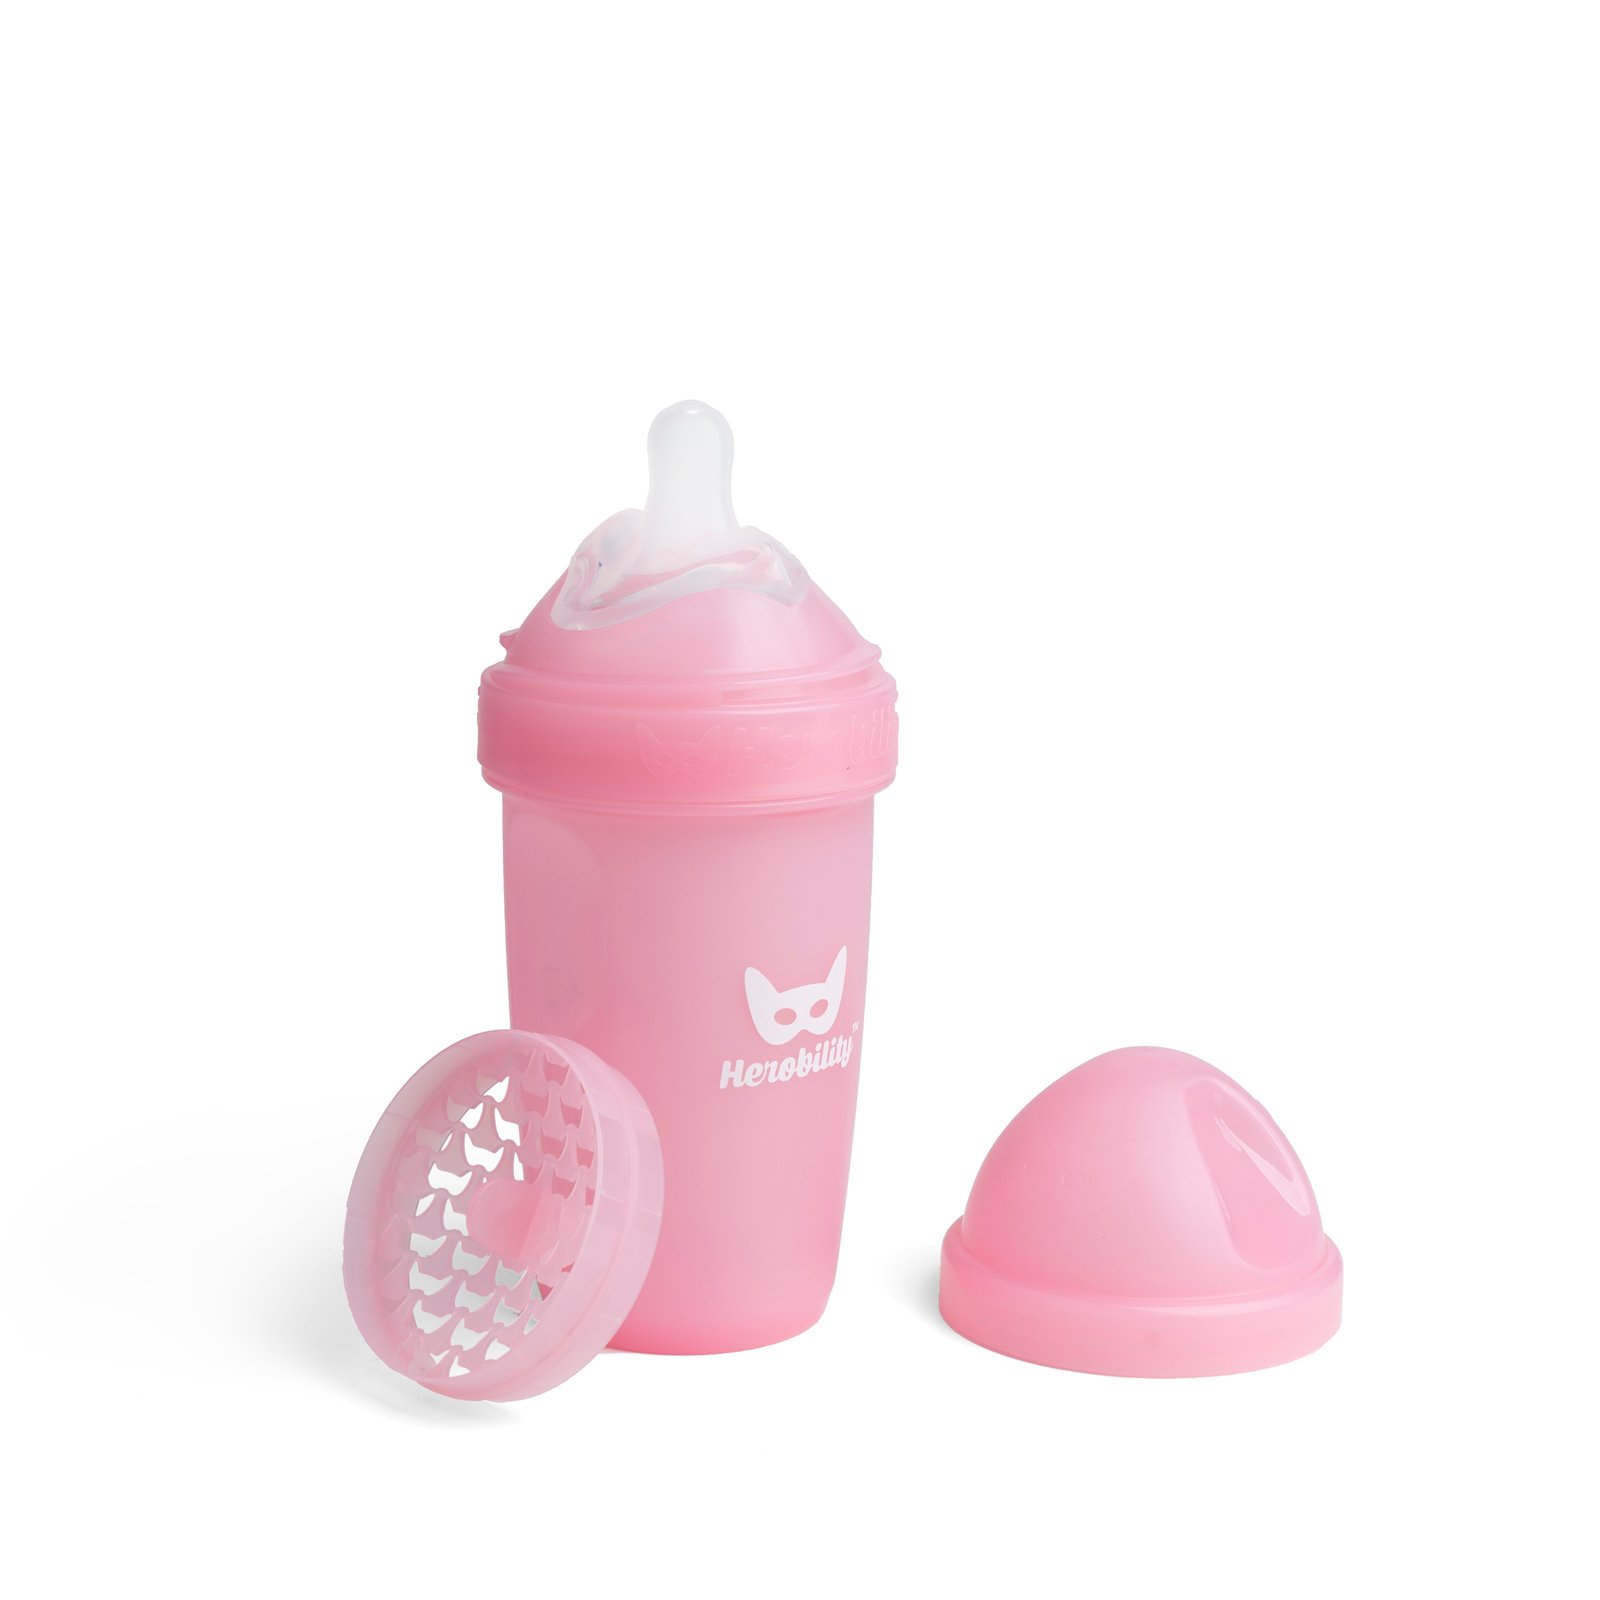 Herobility Baby Bottle Pink 240ml